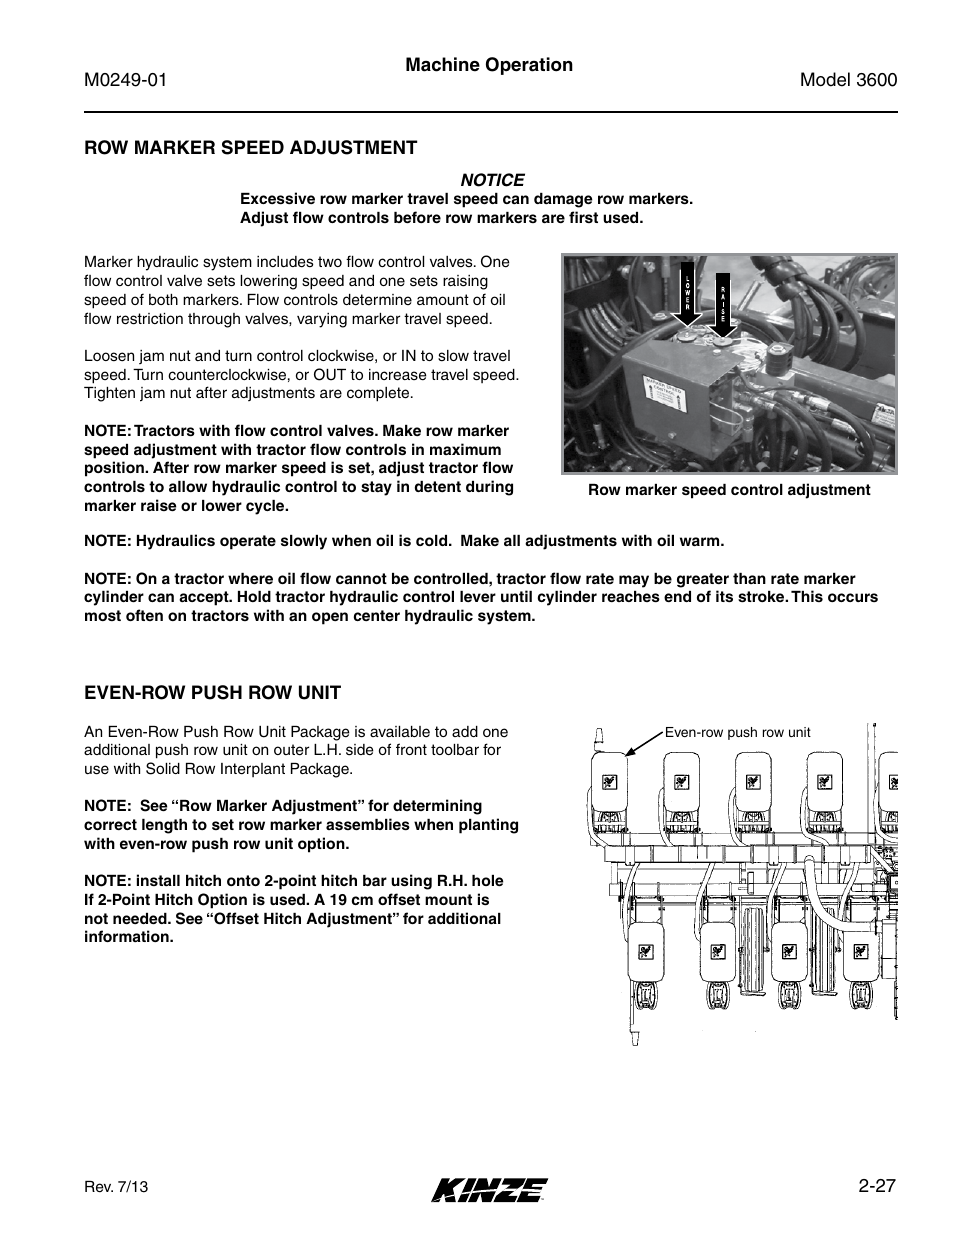 Row marker speed adjustment, Even-row push row unit, Row marker speed adjustment -27 | Even-row push row unit -27 | Kinze 3600 Lift and Rotate Planter (70 CM) Rev. 5/14 User Manual | Page 39 / 158